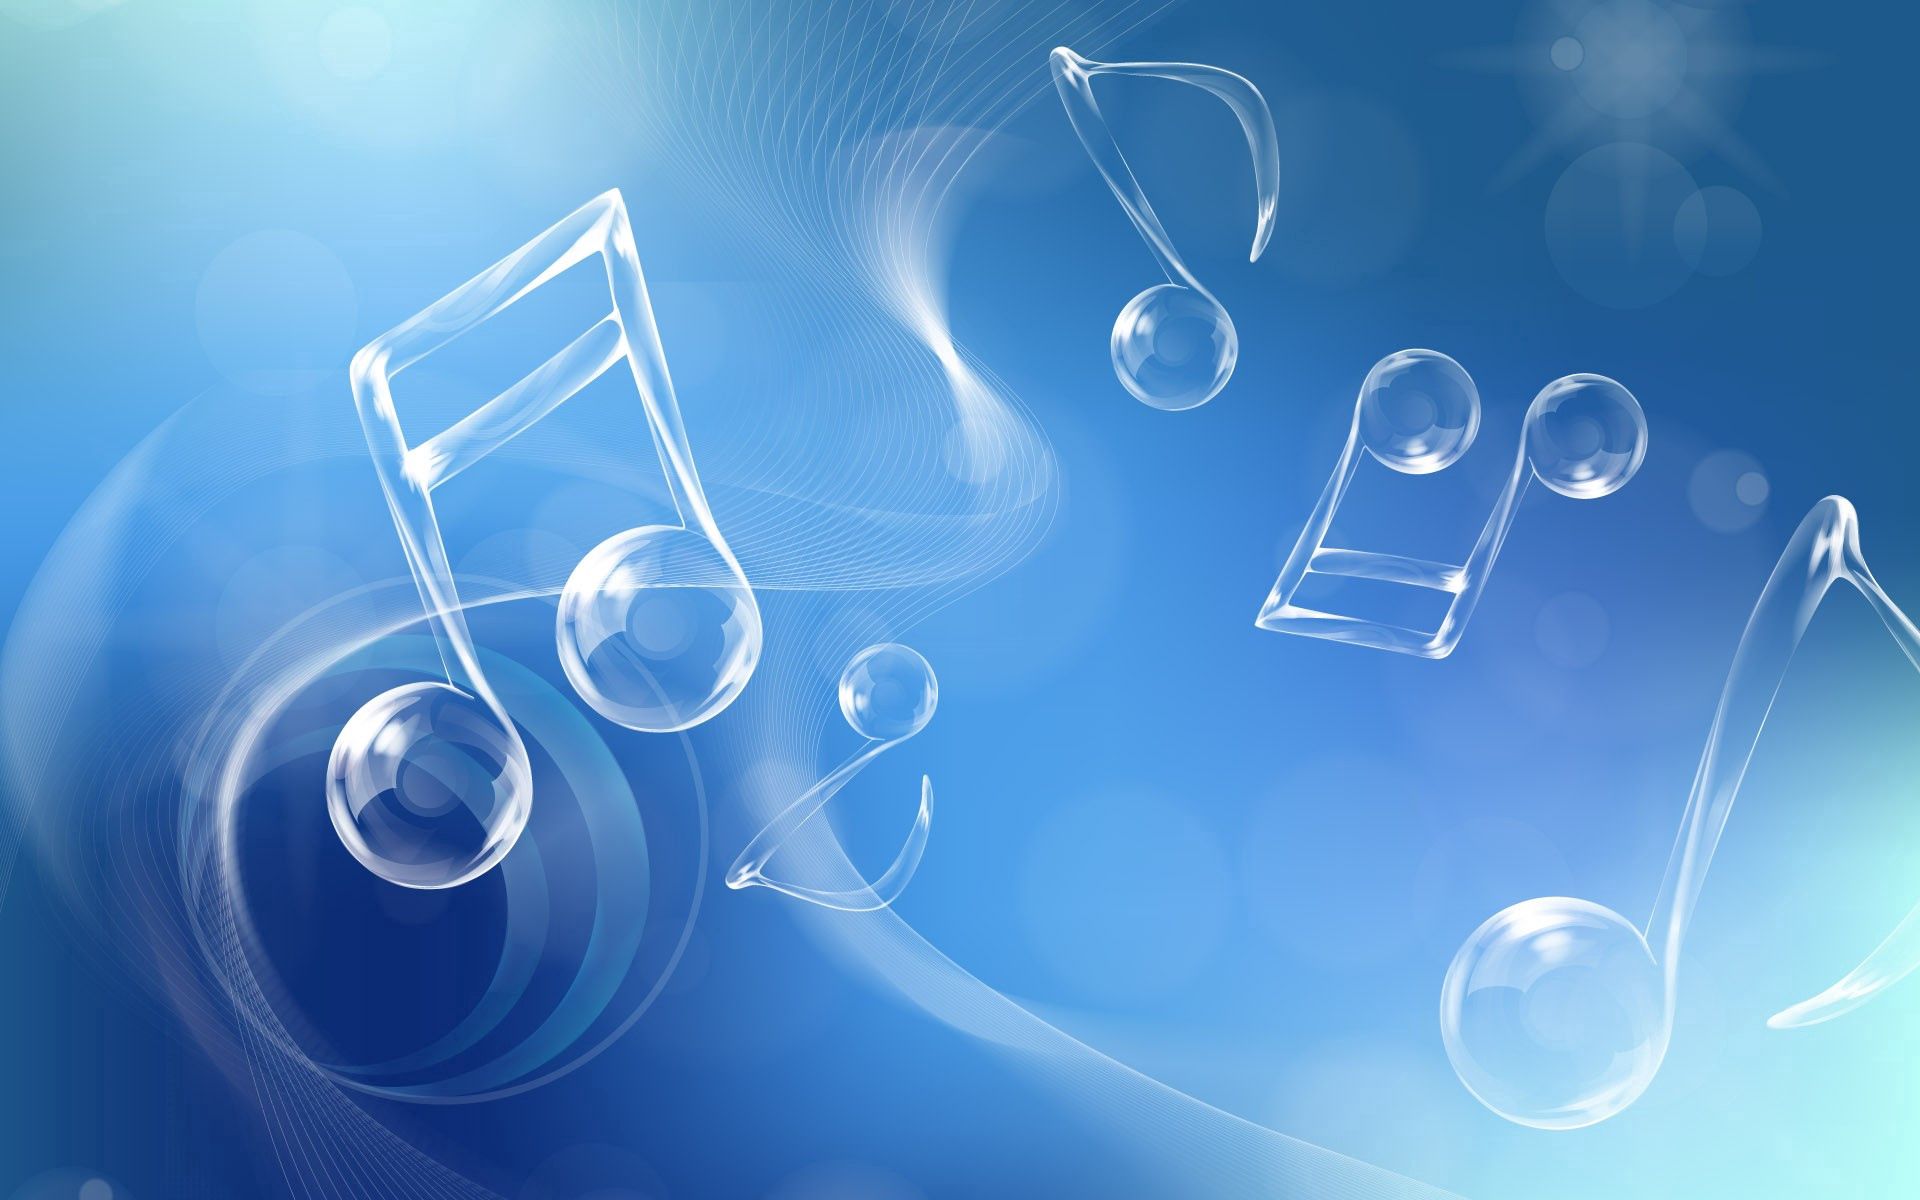 Download wallpaper 1920x1200 blue, white, music, shapes hd background